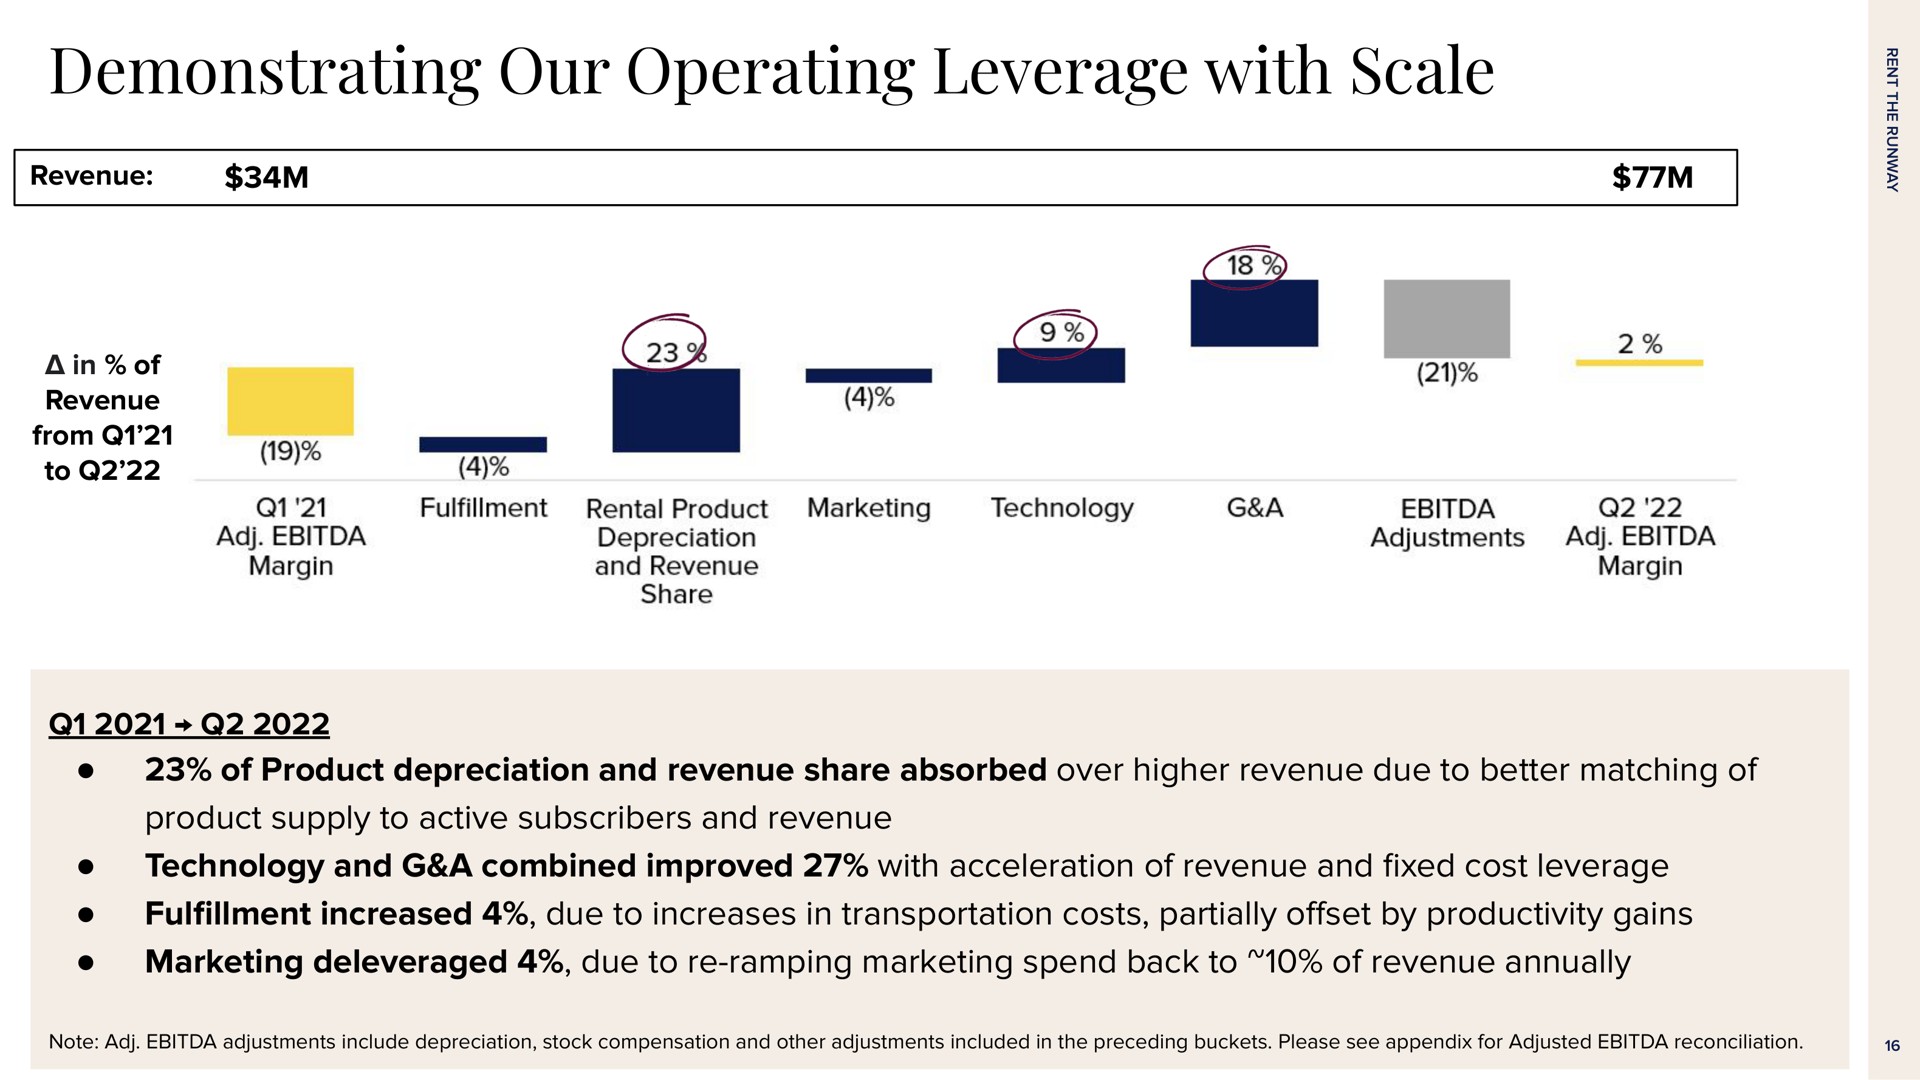 demonstrating our operating leverage with scale revenue in of revenue from to of product depreciation and revenue share absorbed over higher revenue due to better matching of product supply to active subscribers and revenue technology and a combined improved with acceleration of revenue and cost leverage increased due to increases in transportation costs partially set by productivity gains marketing due to ramping marketing spend back to of revenue annually | Rent The Runway